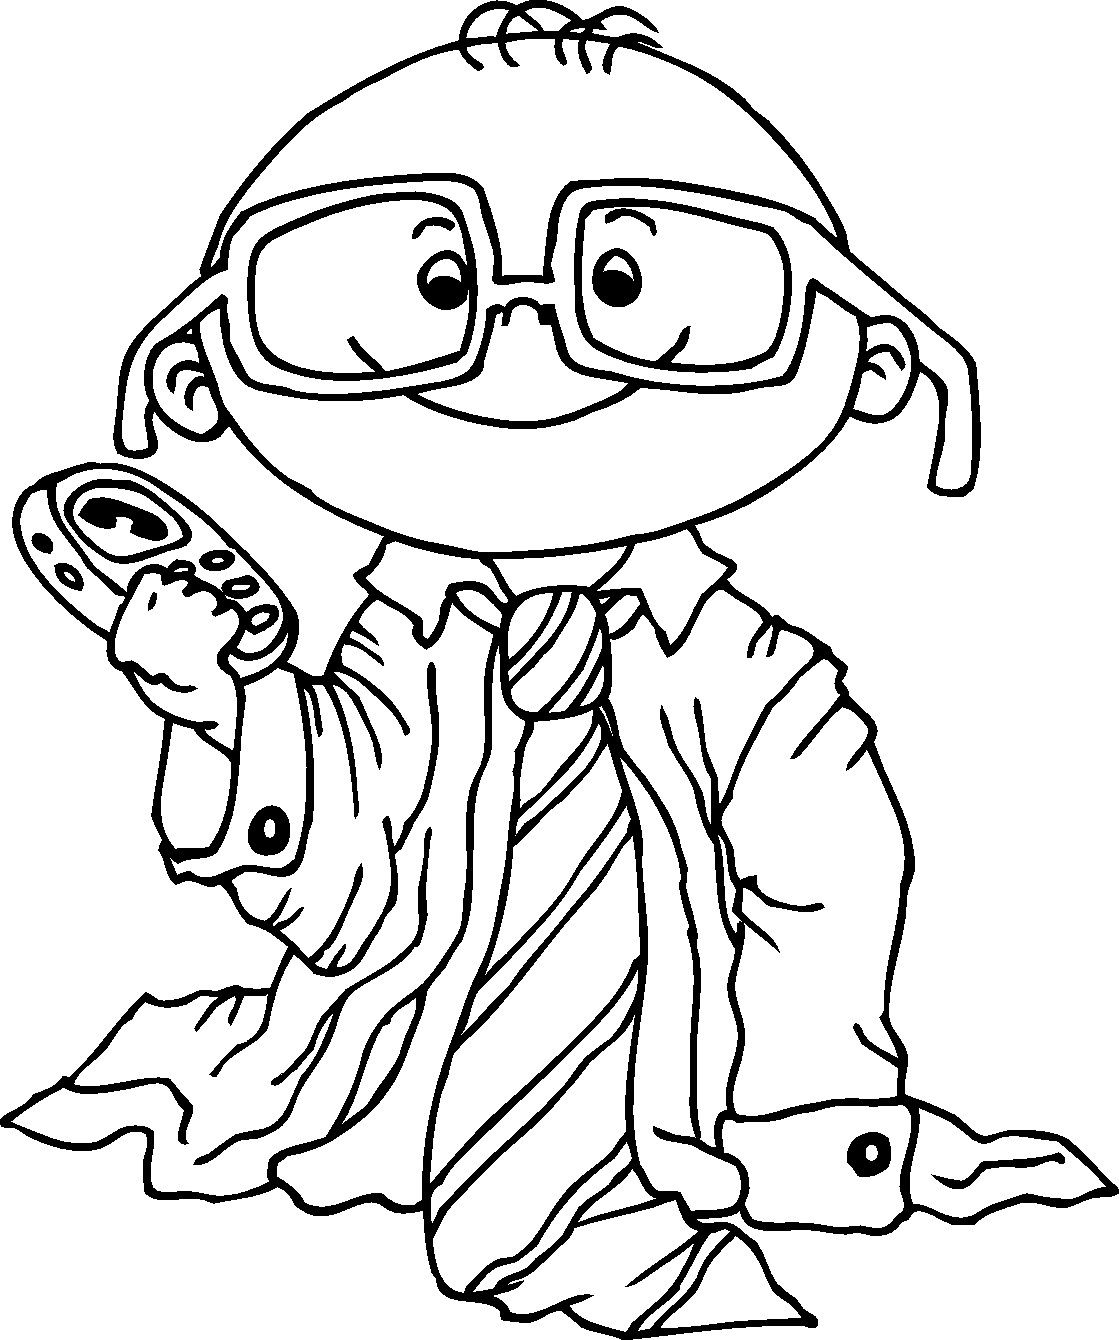 Coloring Pages For Boys And Girls
 Cool And Fun Coloring Pages For Teens The Art Jinni